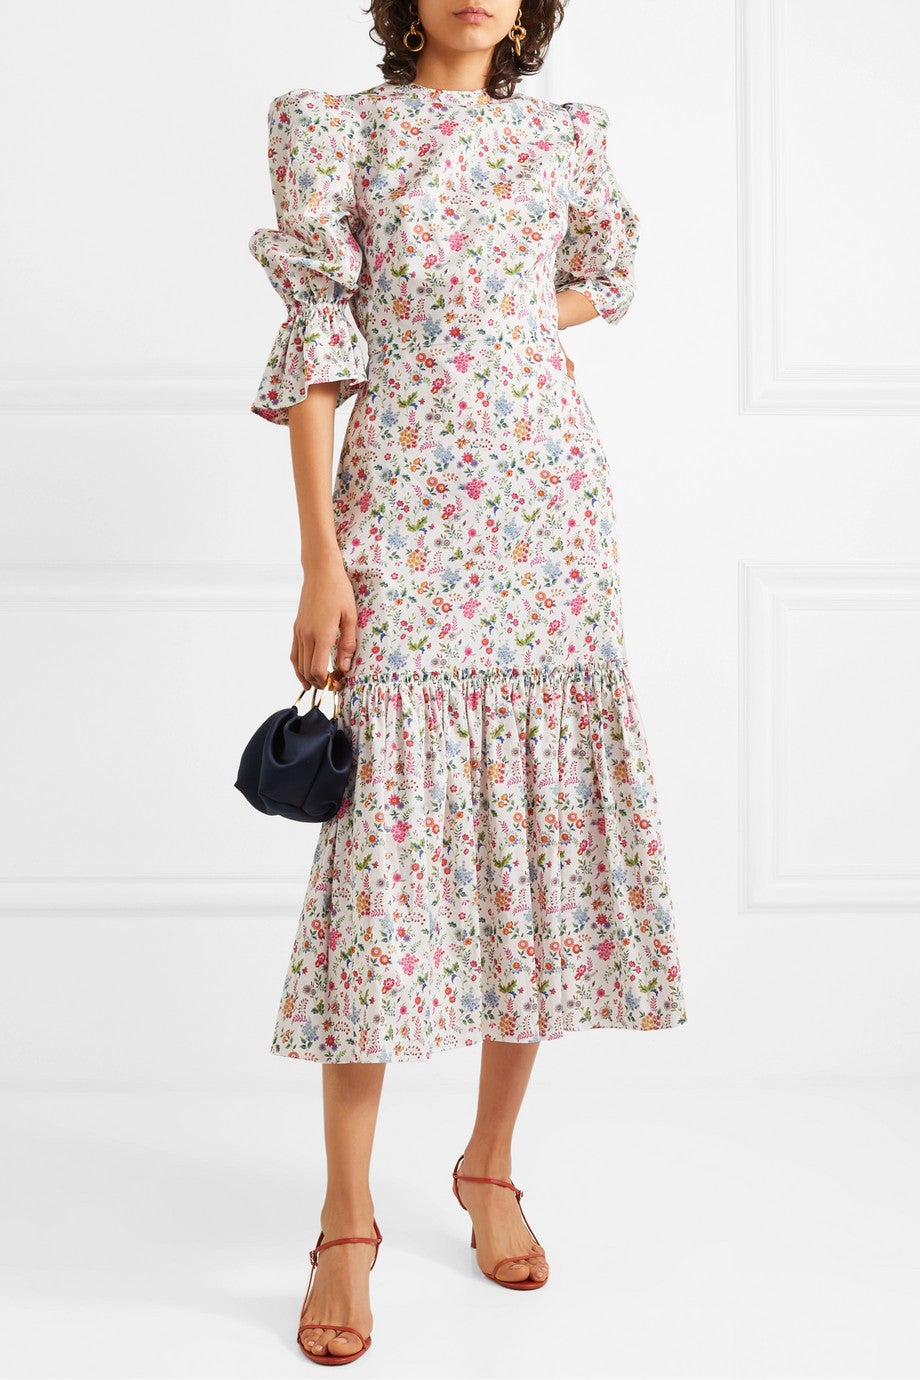 The Vampire’s Wife + Our Favourite Picks From The Net-A-Porter Sale